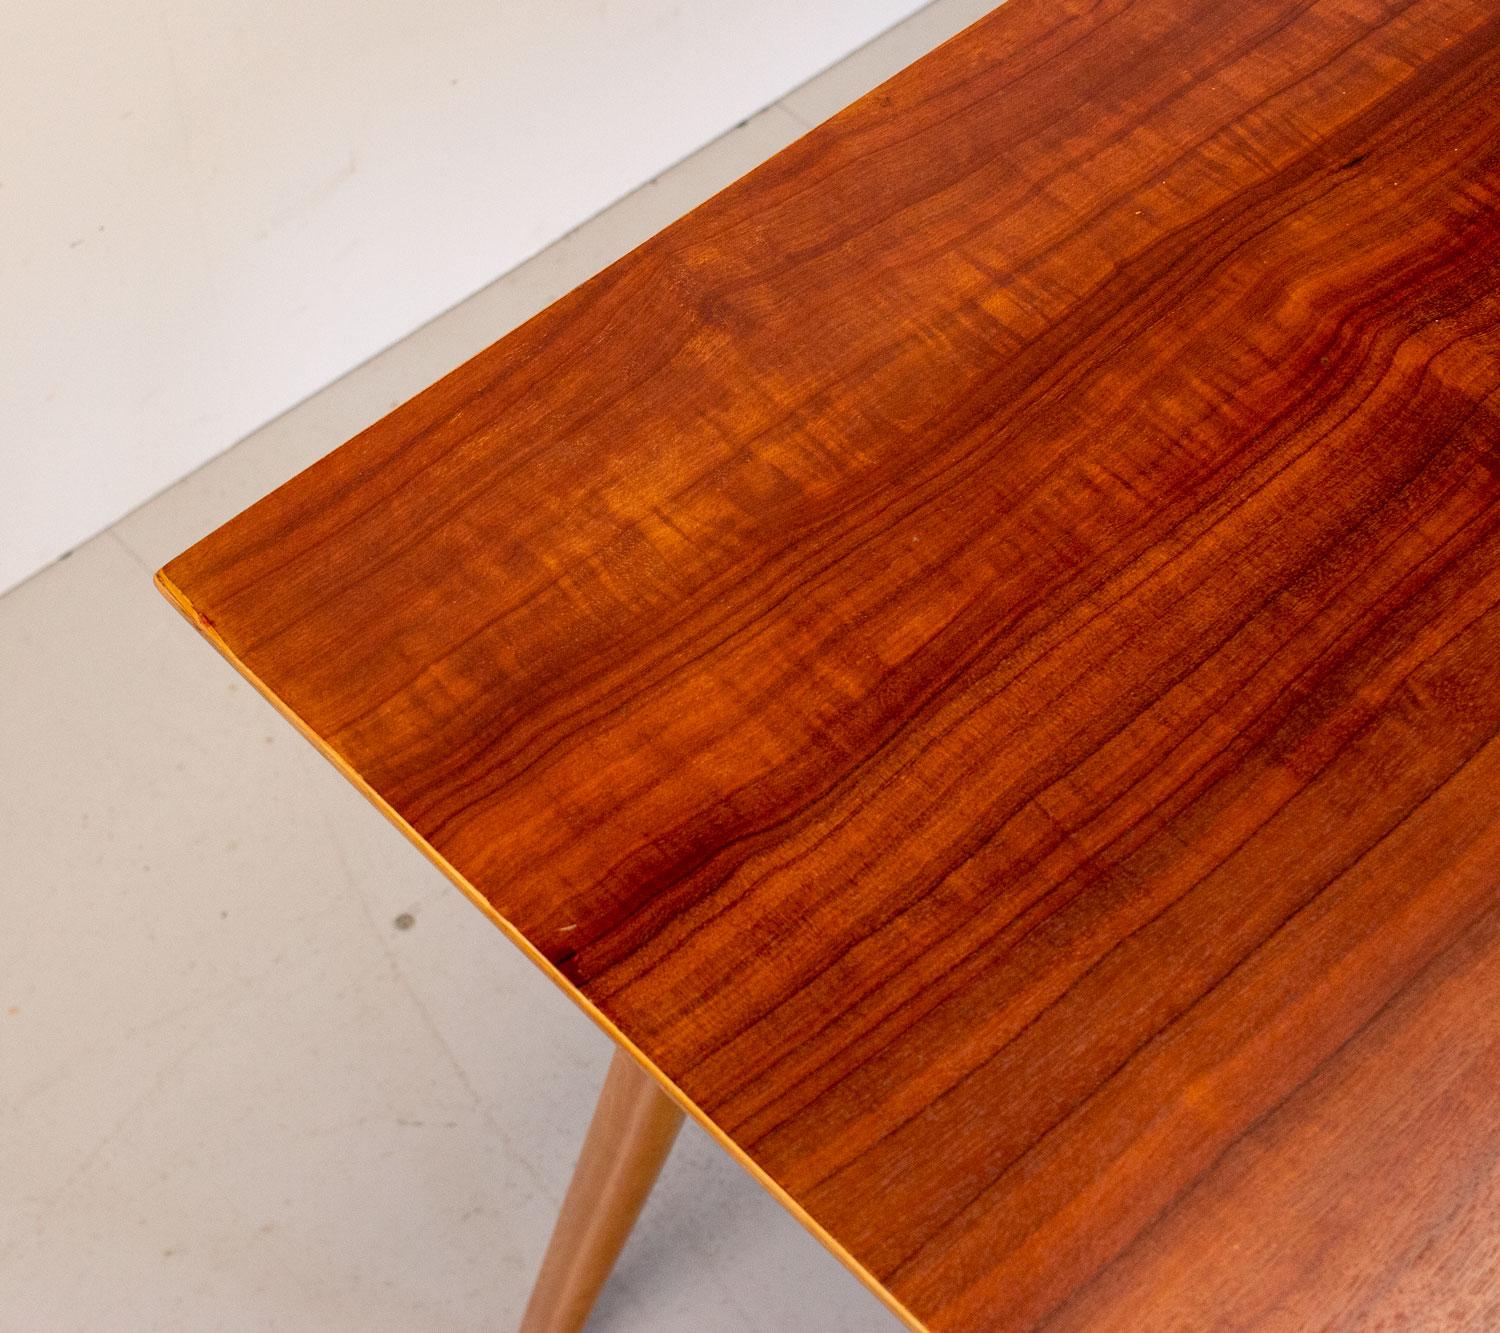 Beech Robin Day Cherry Dining Table by Hille, 1950s For Sale